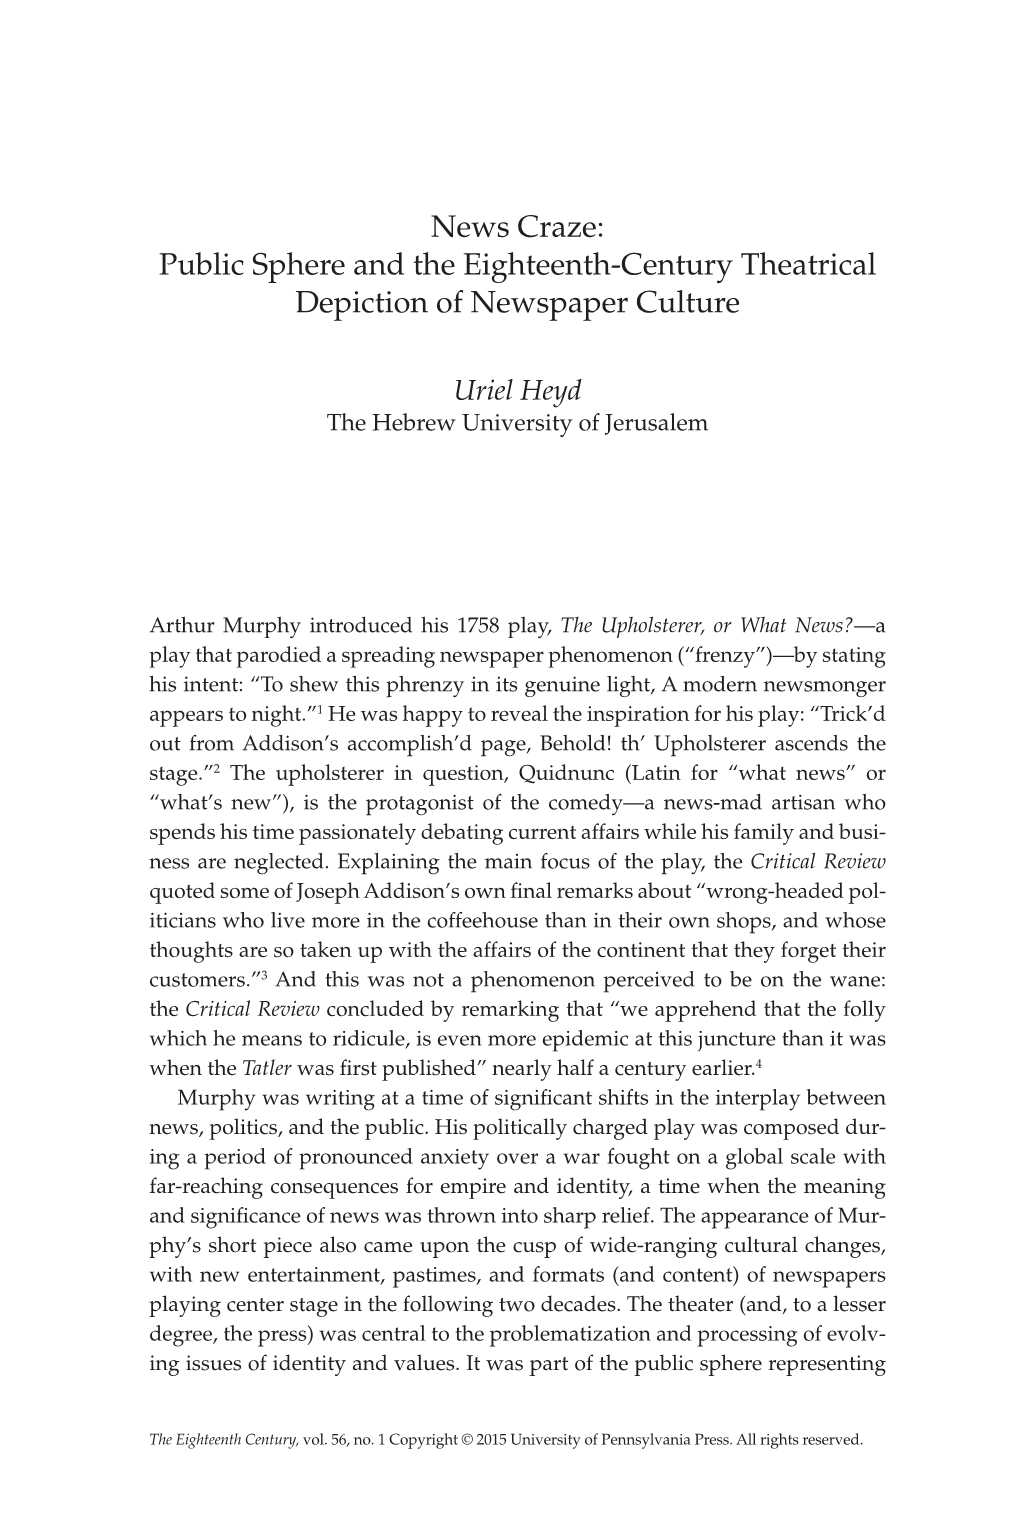 News Craze: Public Sphere and the Eighteenth-Century Theatrical Depiction of Newspaper Culture